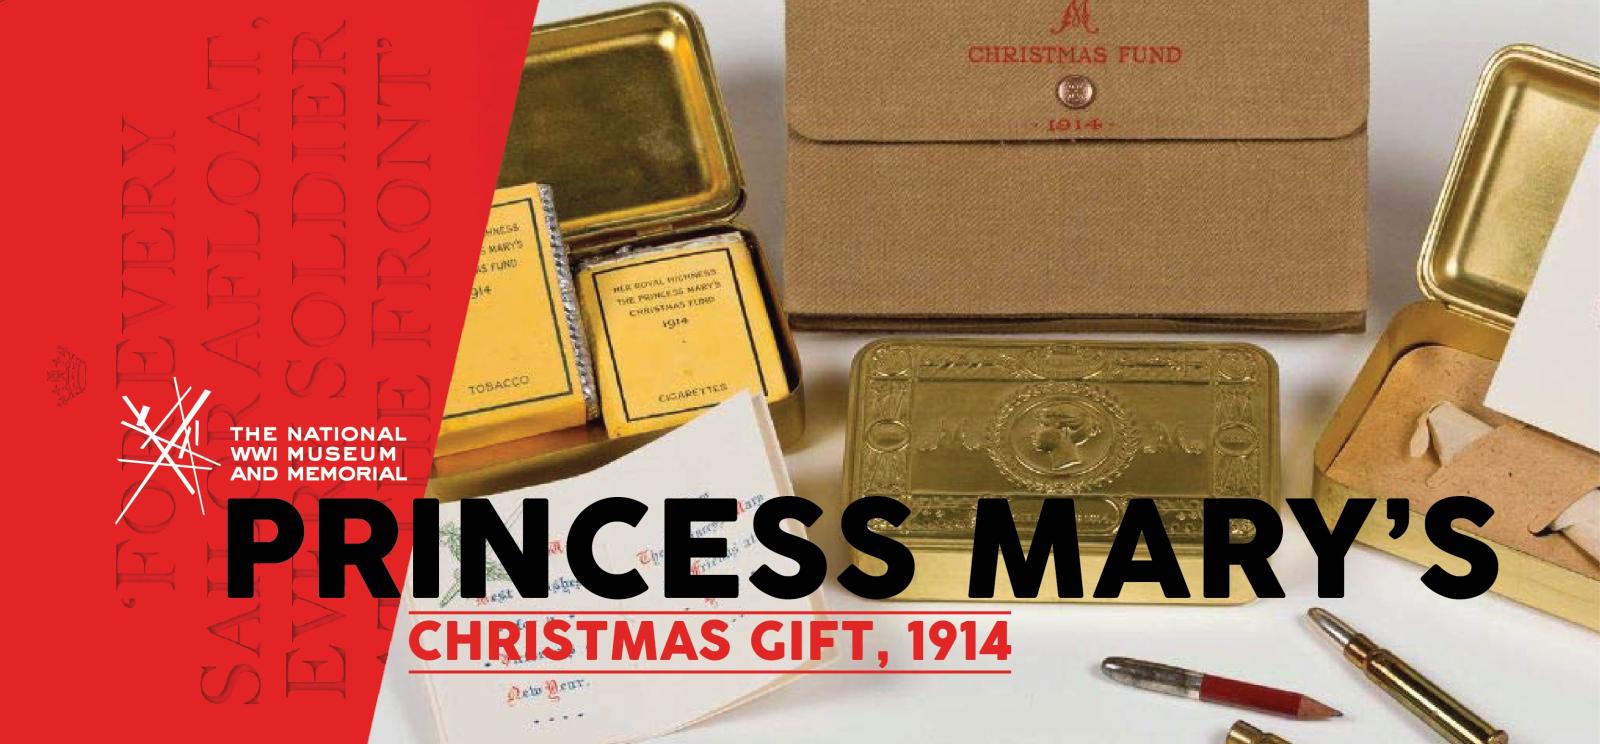 Background image: Modern photograph of WWI-era metal tins opened to display gifts inside. Text: Princess Mary's Christmas Gift, 1914